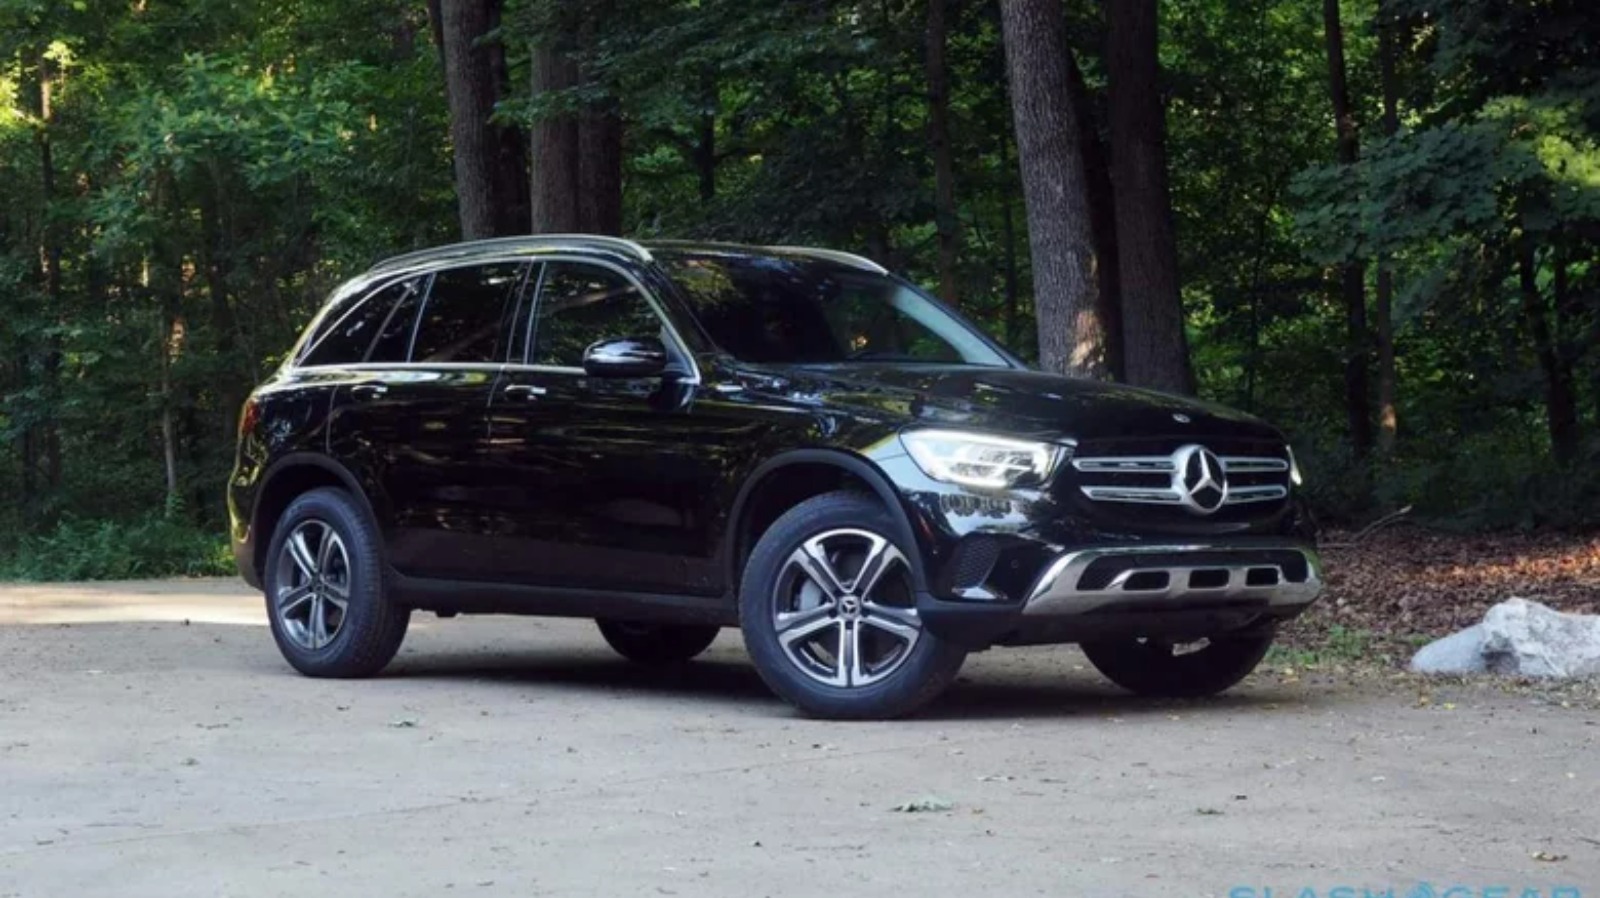 2021 Mercedes-Benz GLC 300 4MATIC Review: The Self-Confident SUV